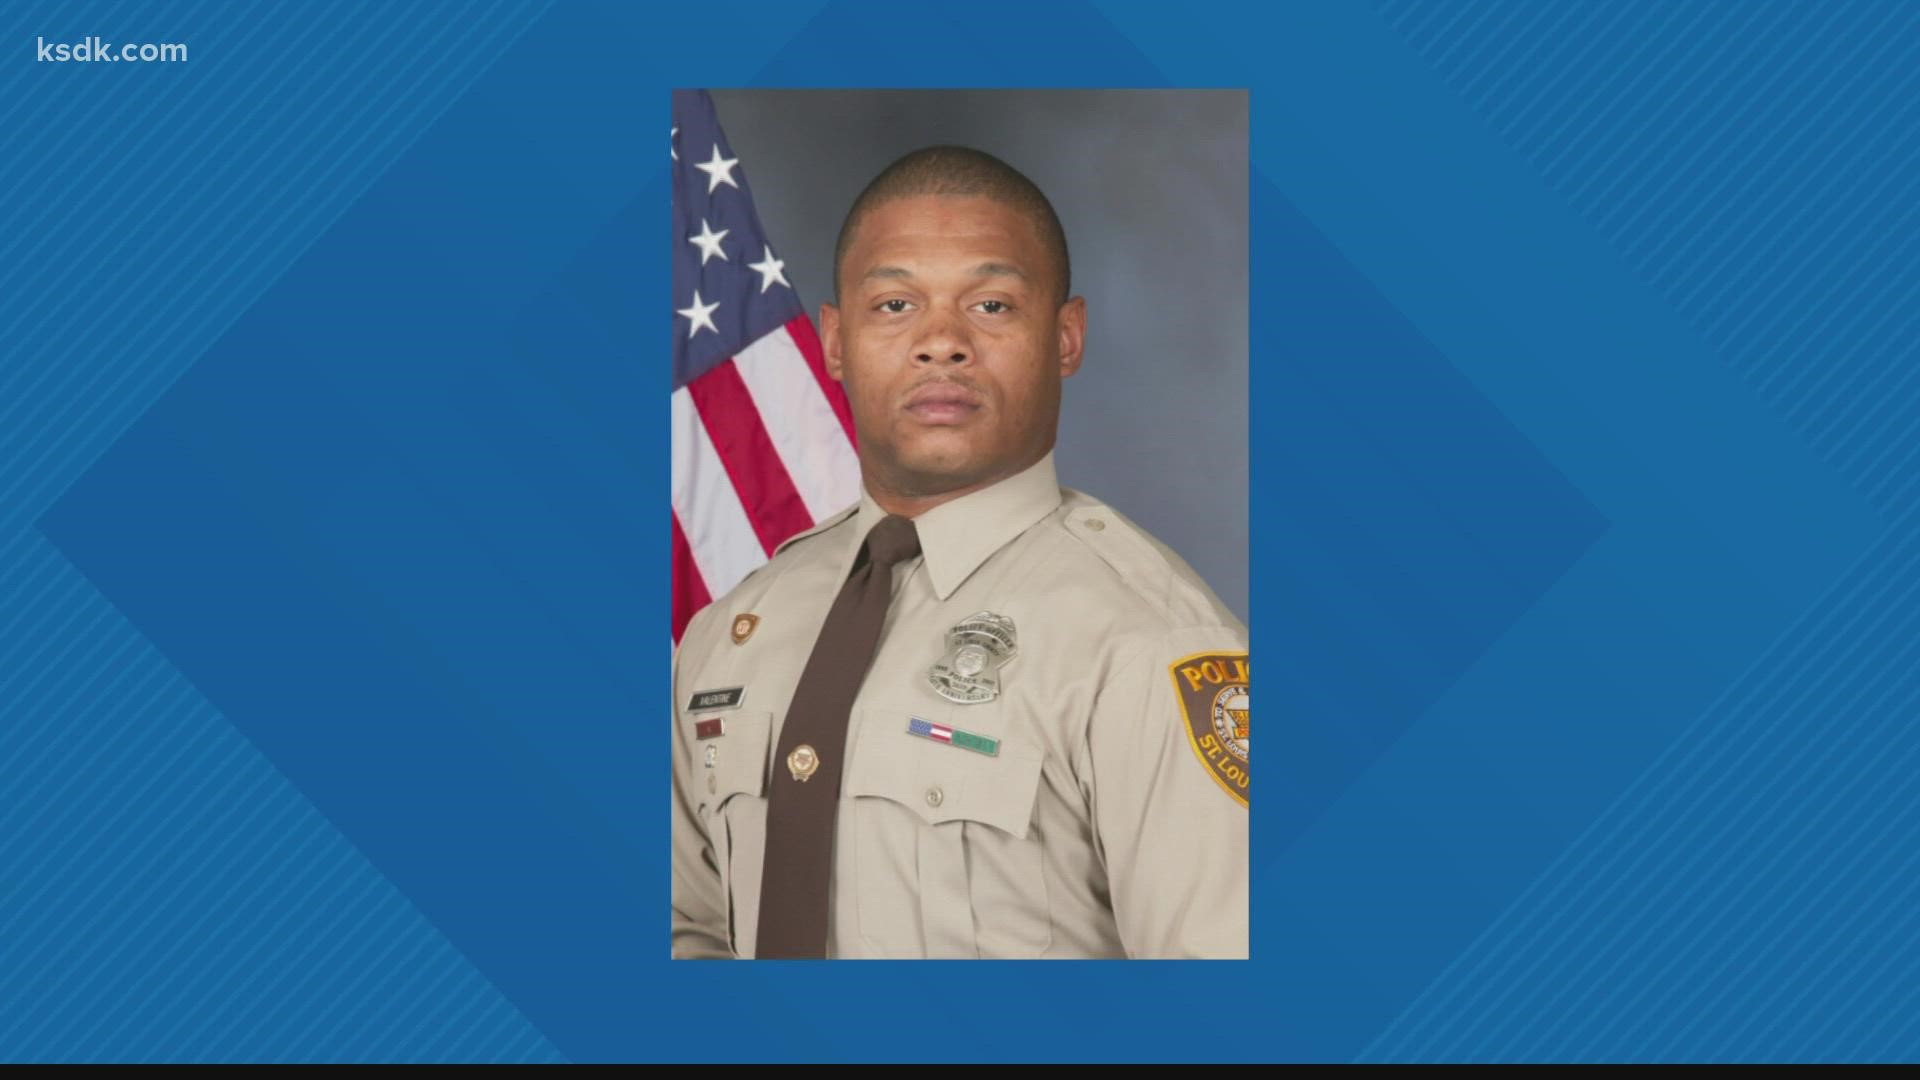 In a press conference, Interim St. Louis County Police Chief Kenneth Gregory said Officer Antonio Valentine, 42, was killed in the crash.